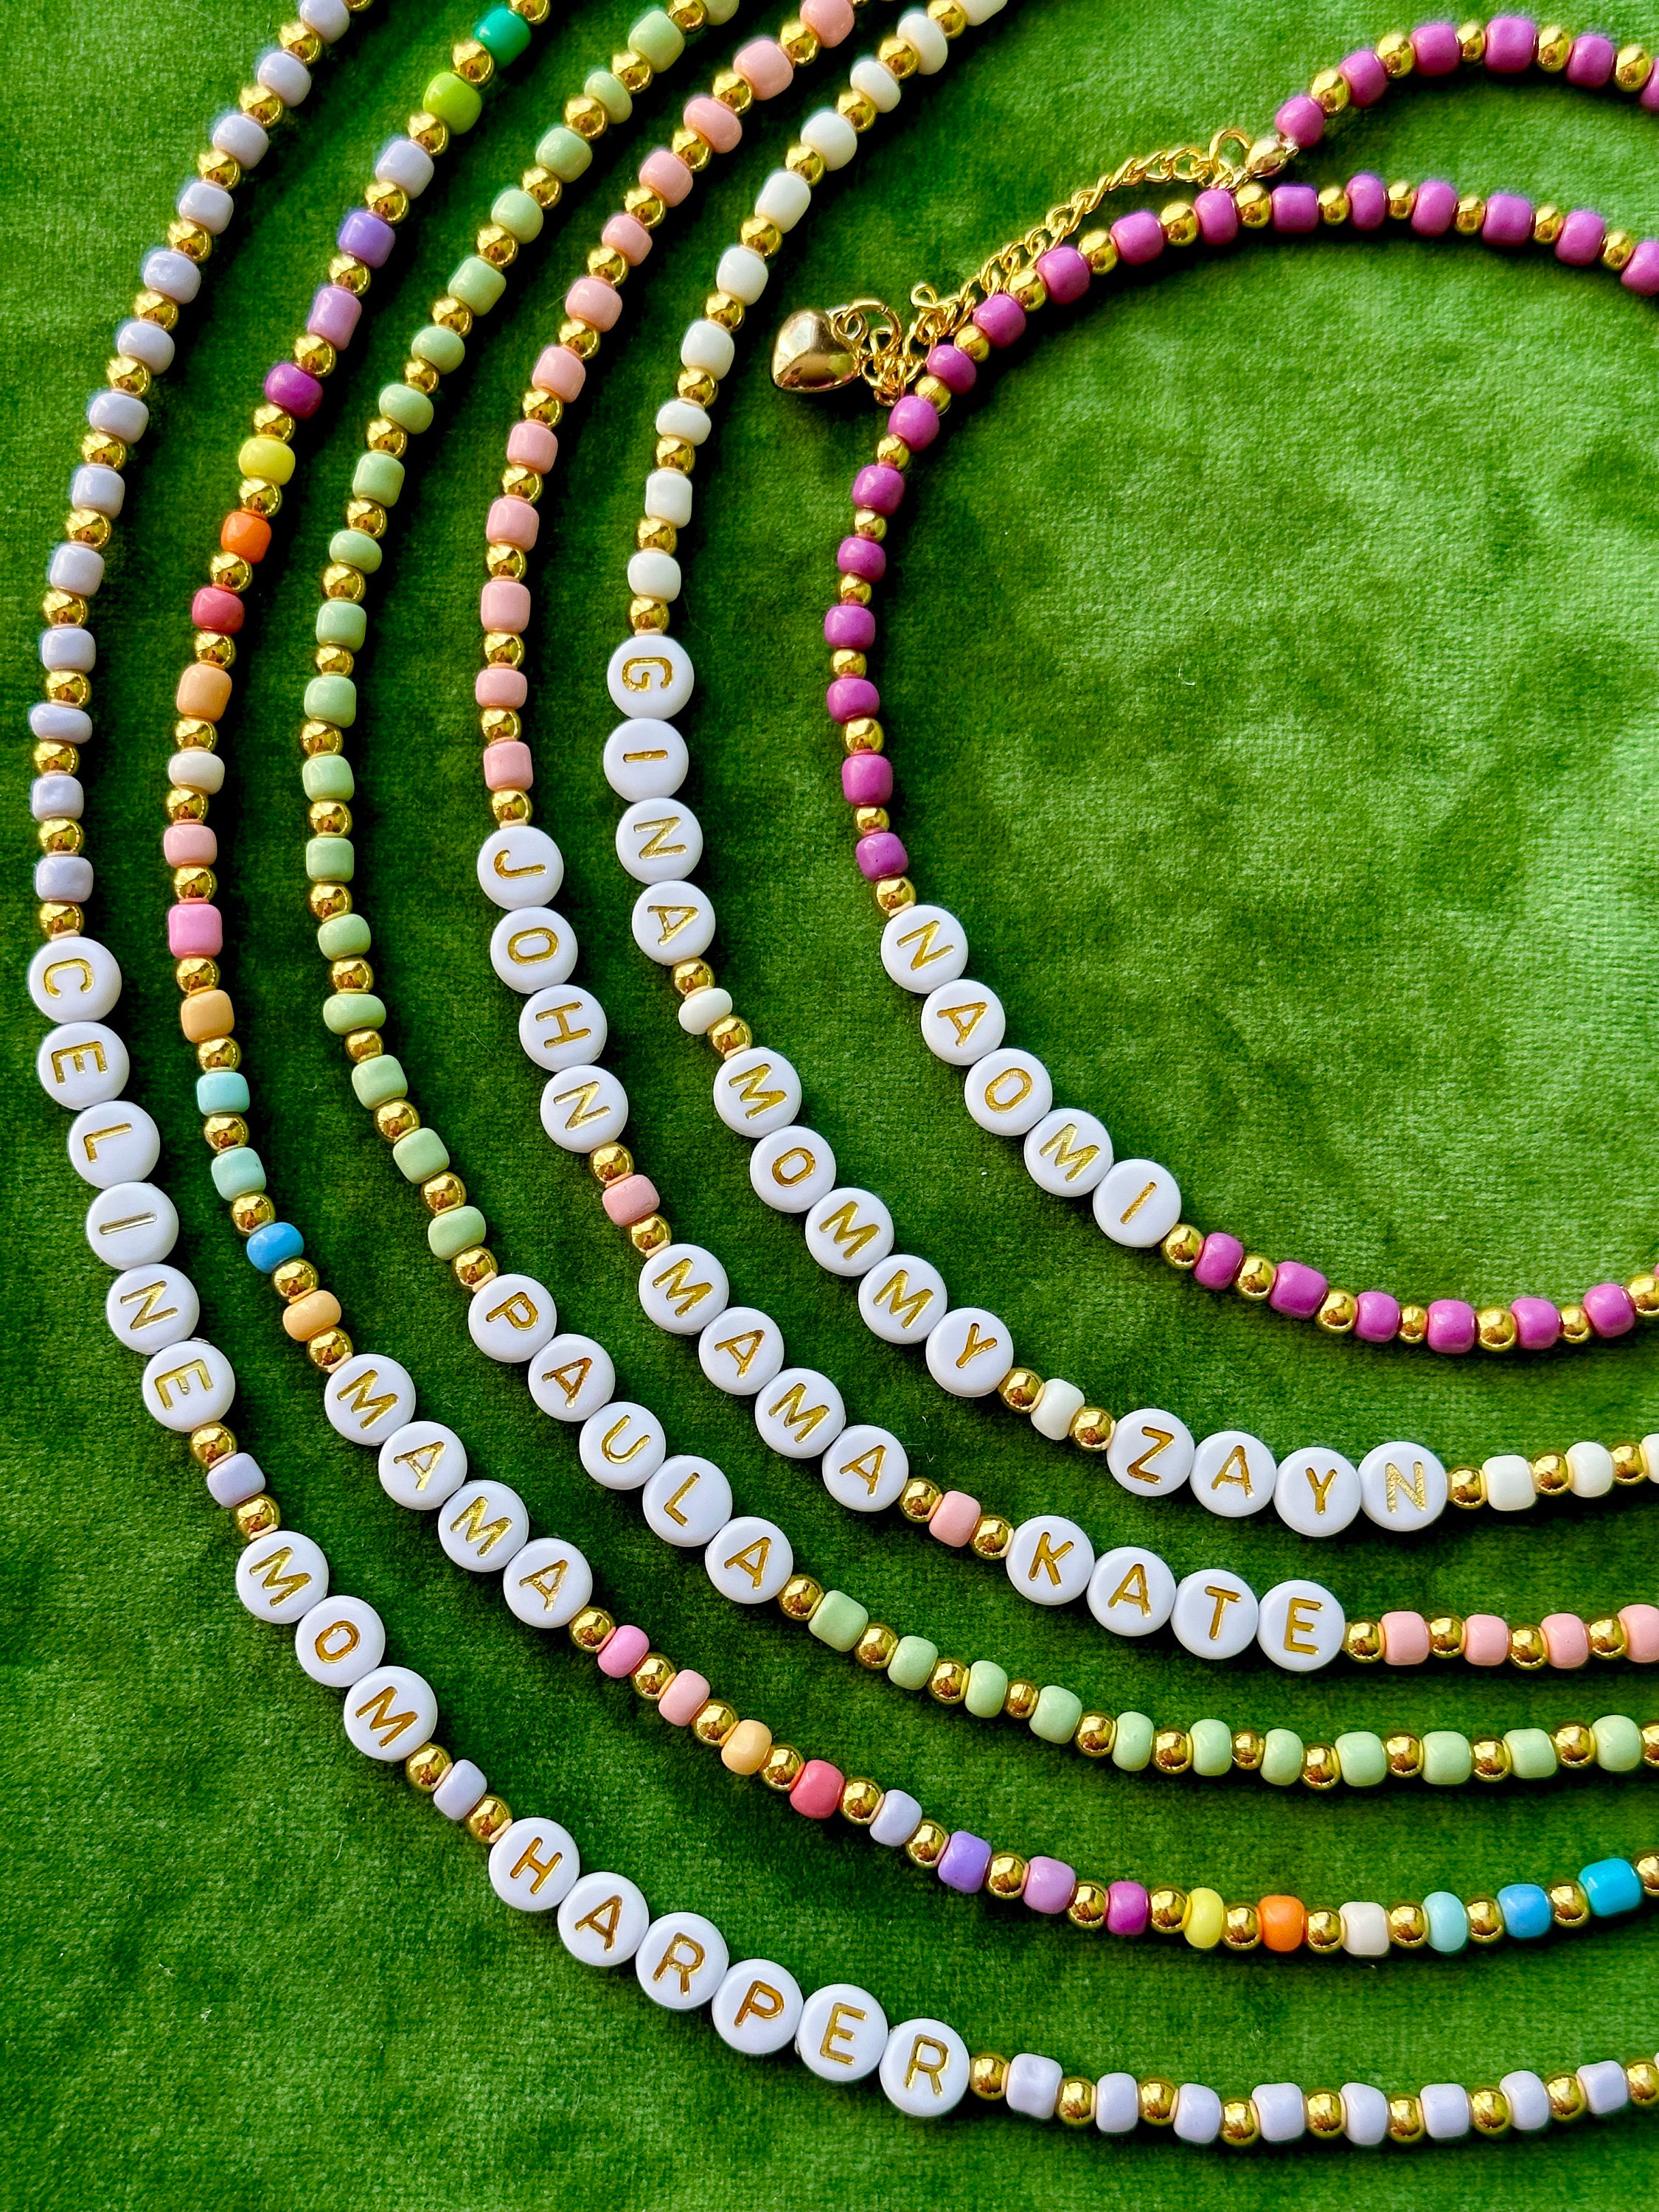 Promotional Customized Twist Bead Necklaces